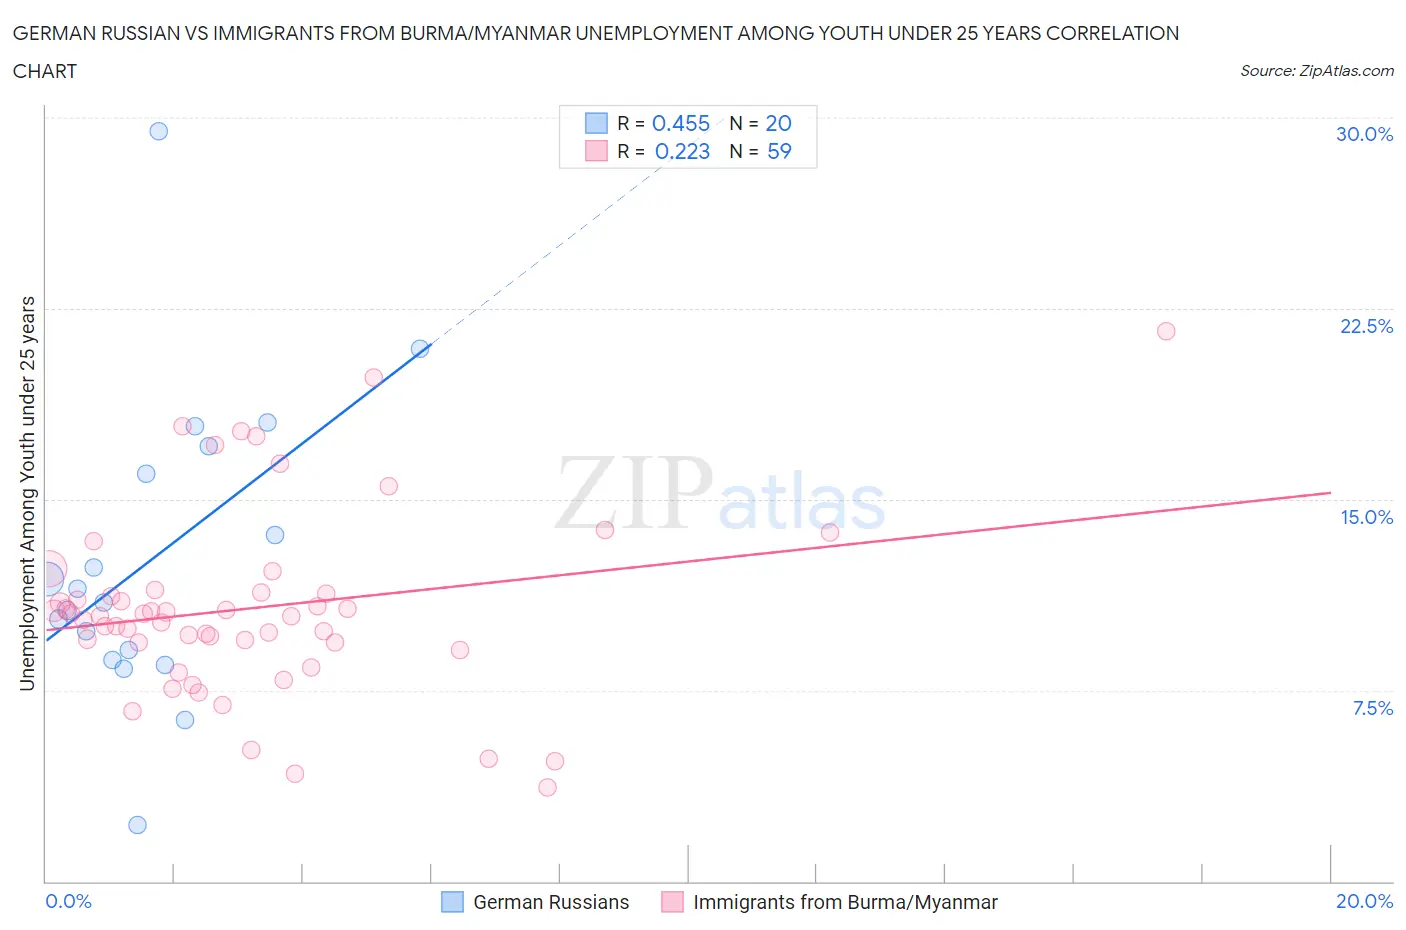 German Russian vs Immigrants from Burma/Myanmar Unemployment Among Youth under 25 years